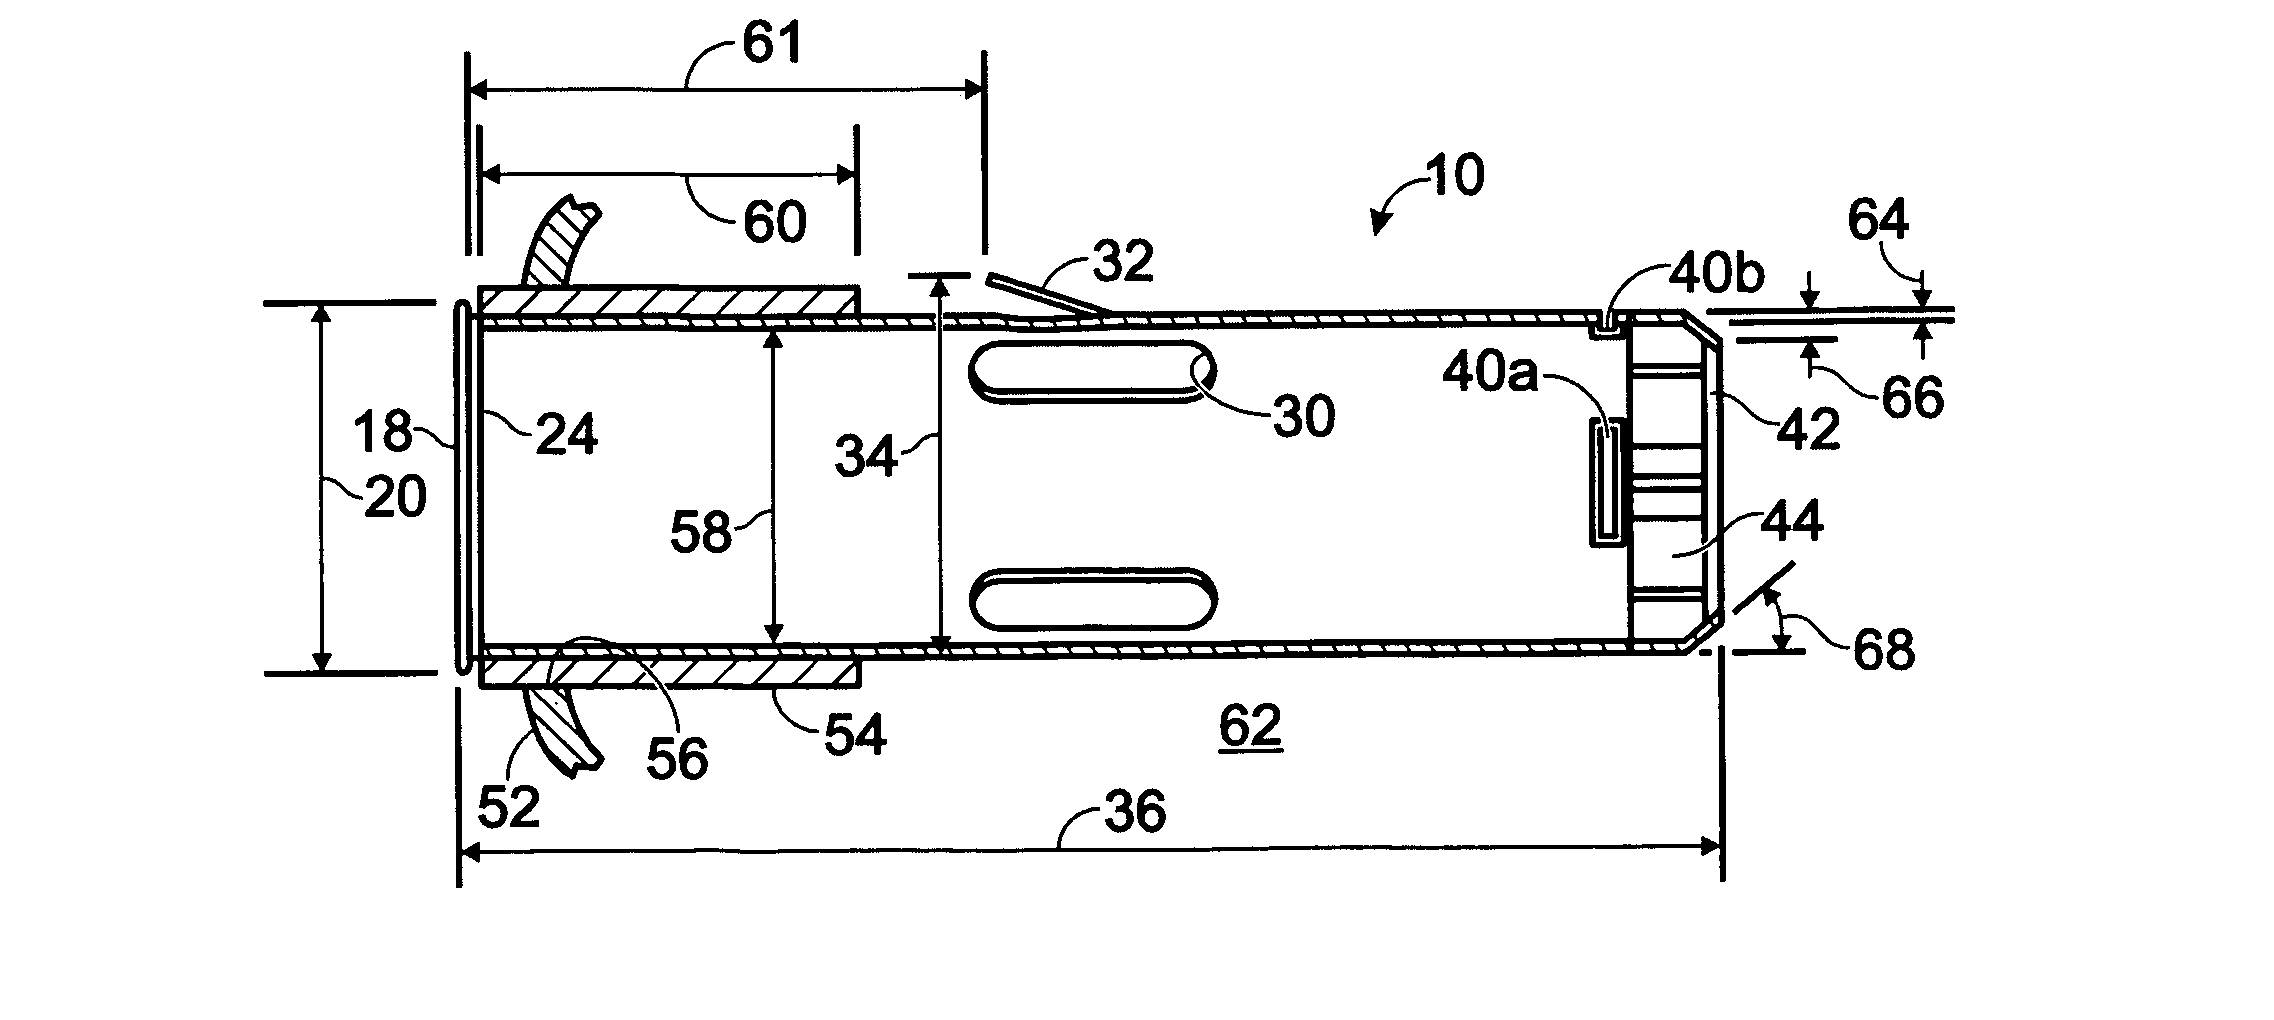 Anti-siphon fuel filler assembly and method of manufacturing the same